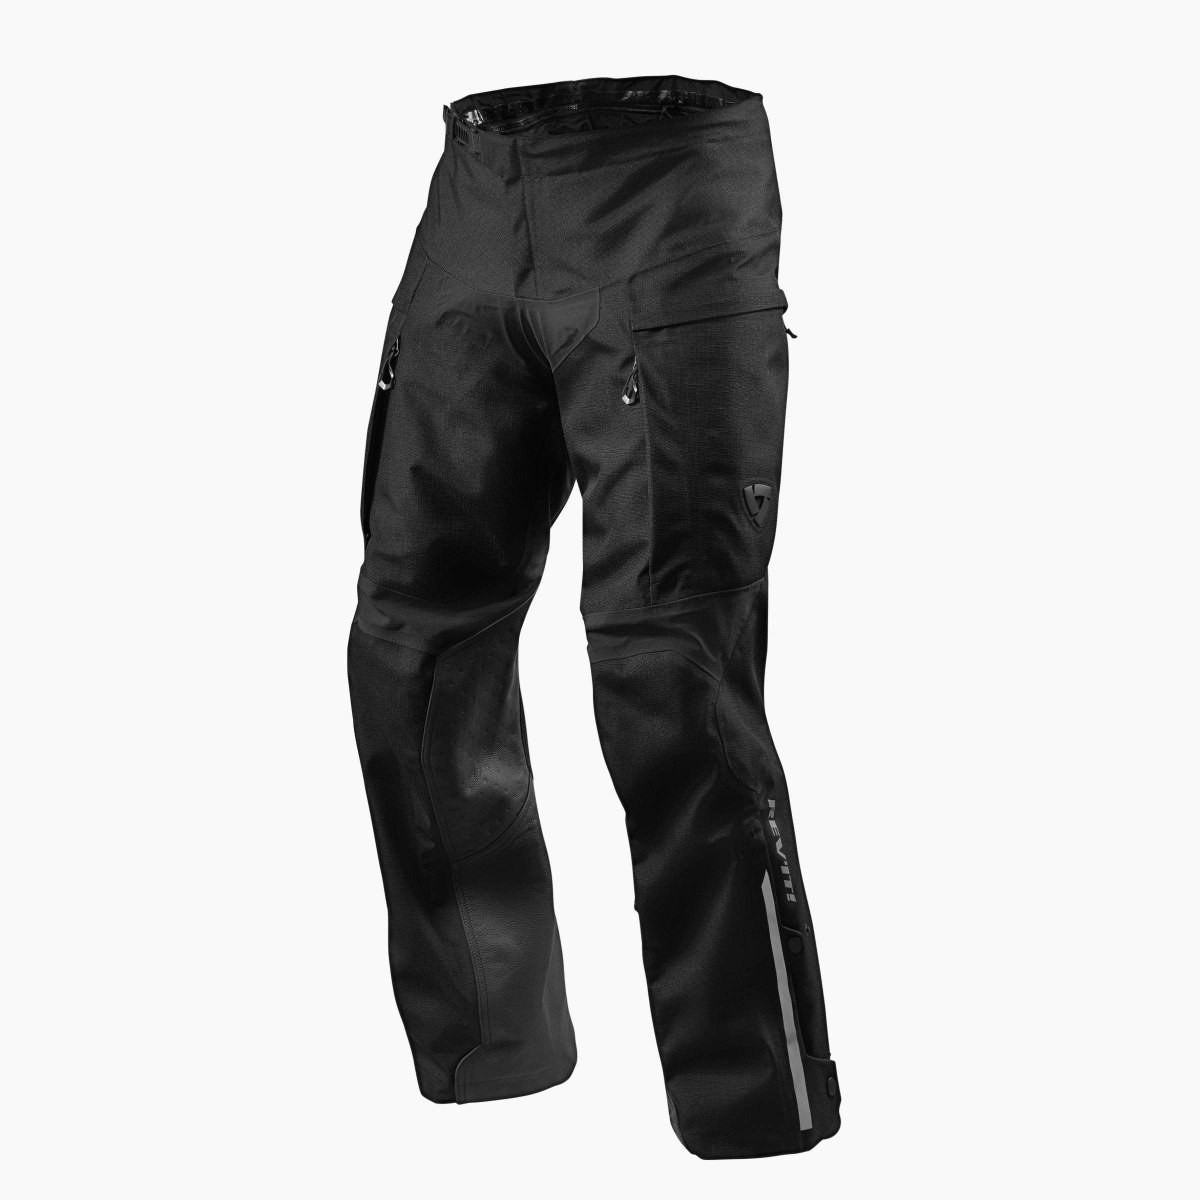 Image of REV'IT! Component H2O Long Black Motorcycle Pants Taille L